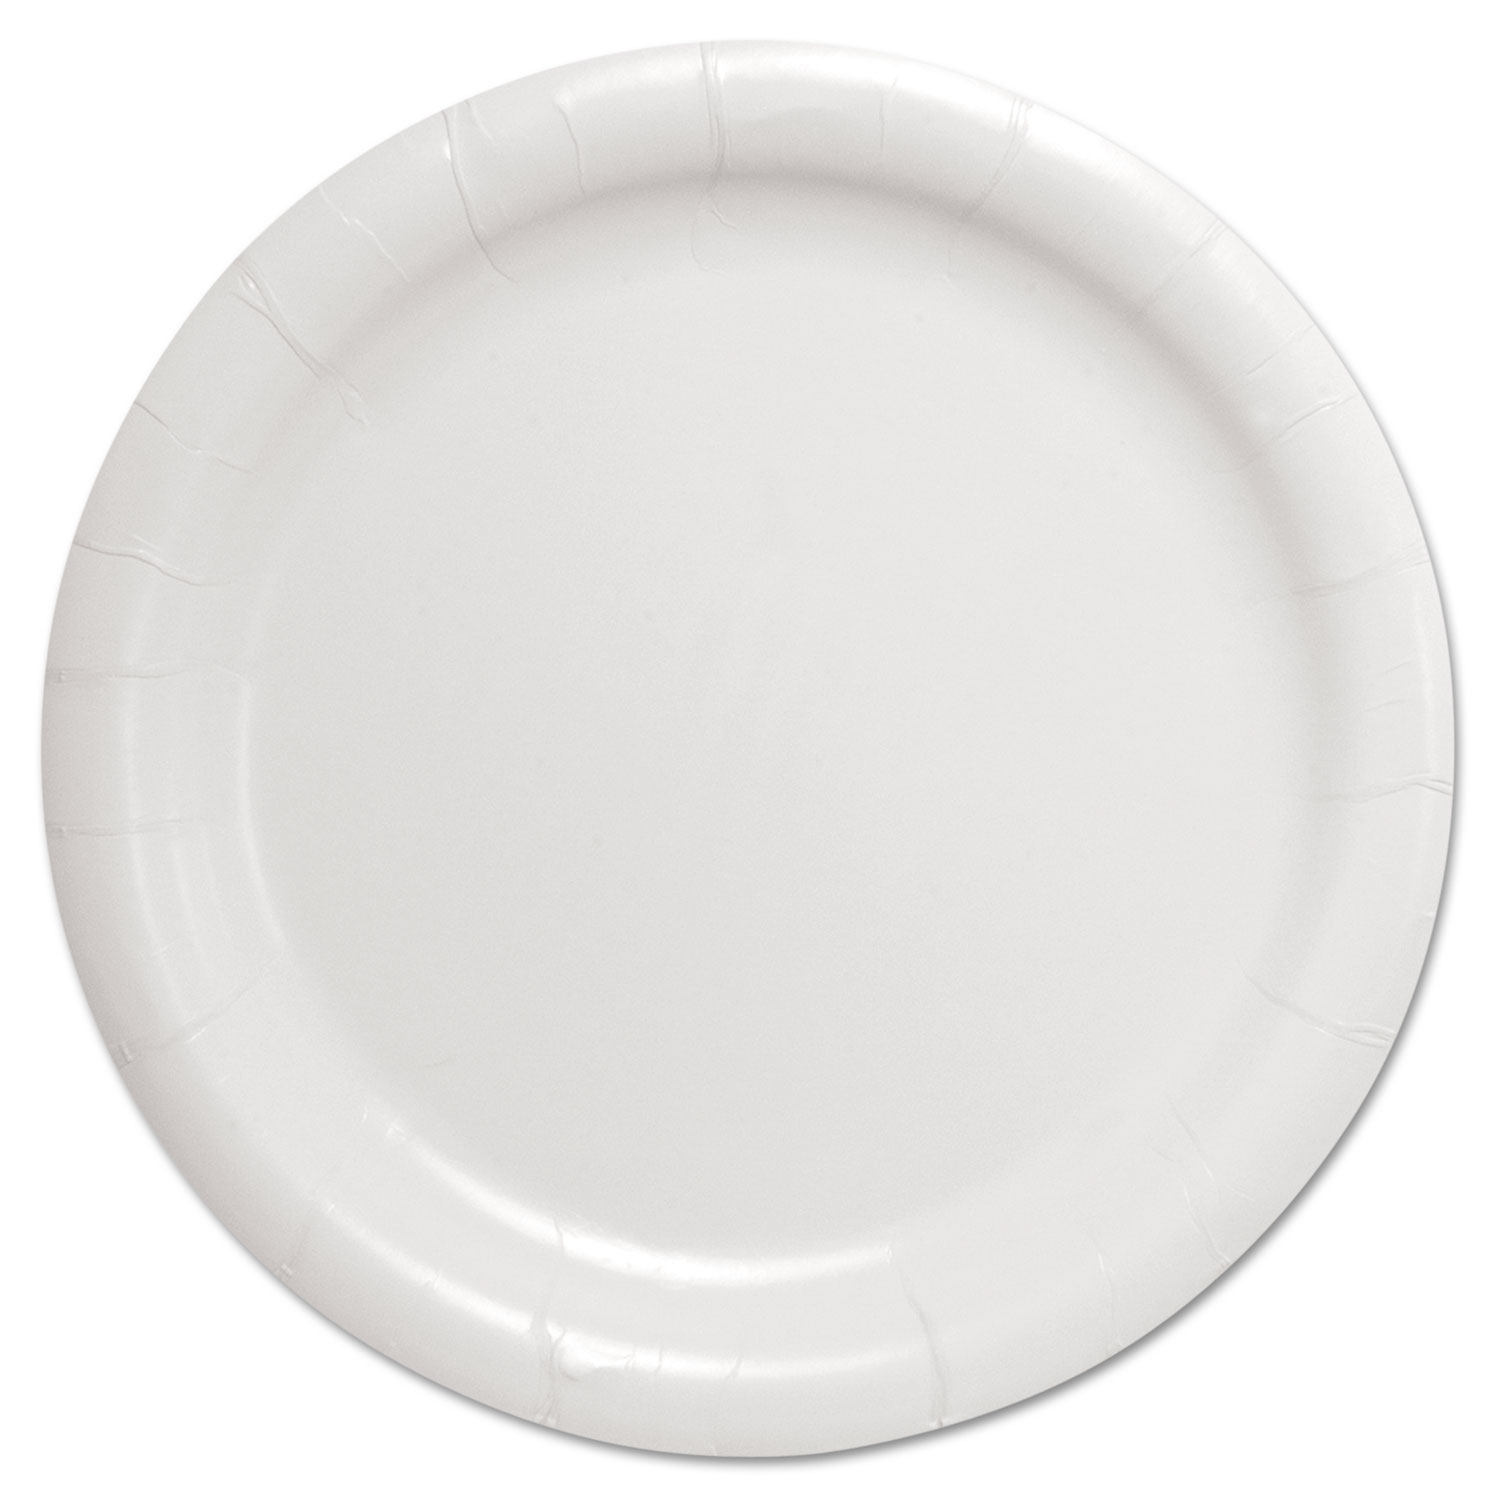  Dart HP9S-2050 Bare Eco-Forward Clay-Coated Paper Dinnerware, Plate, 9 Diameter, White (SCCHP9S) 